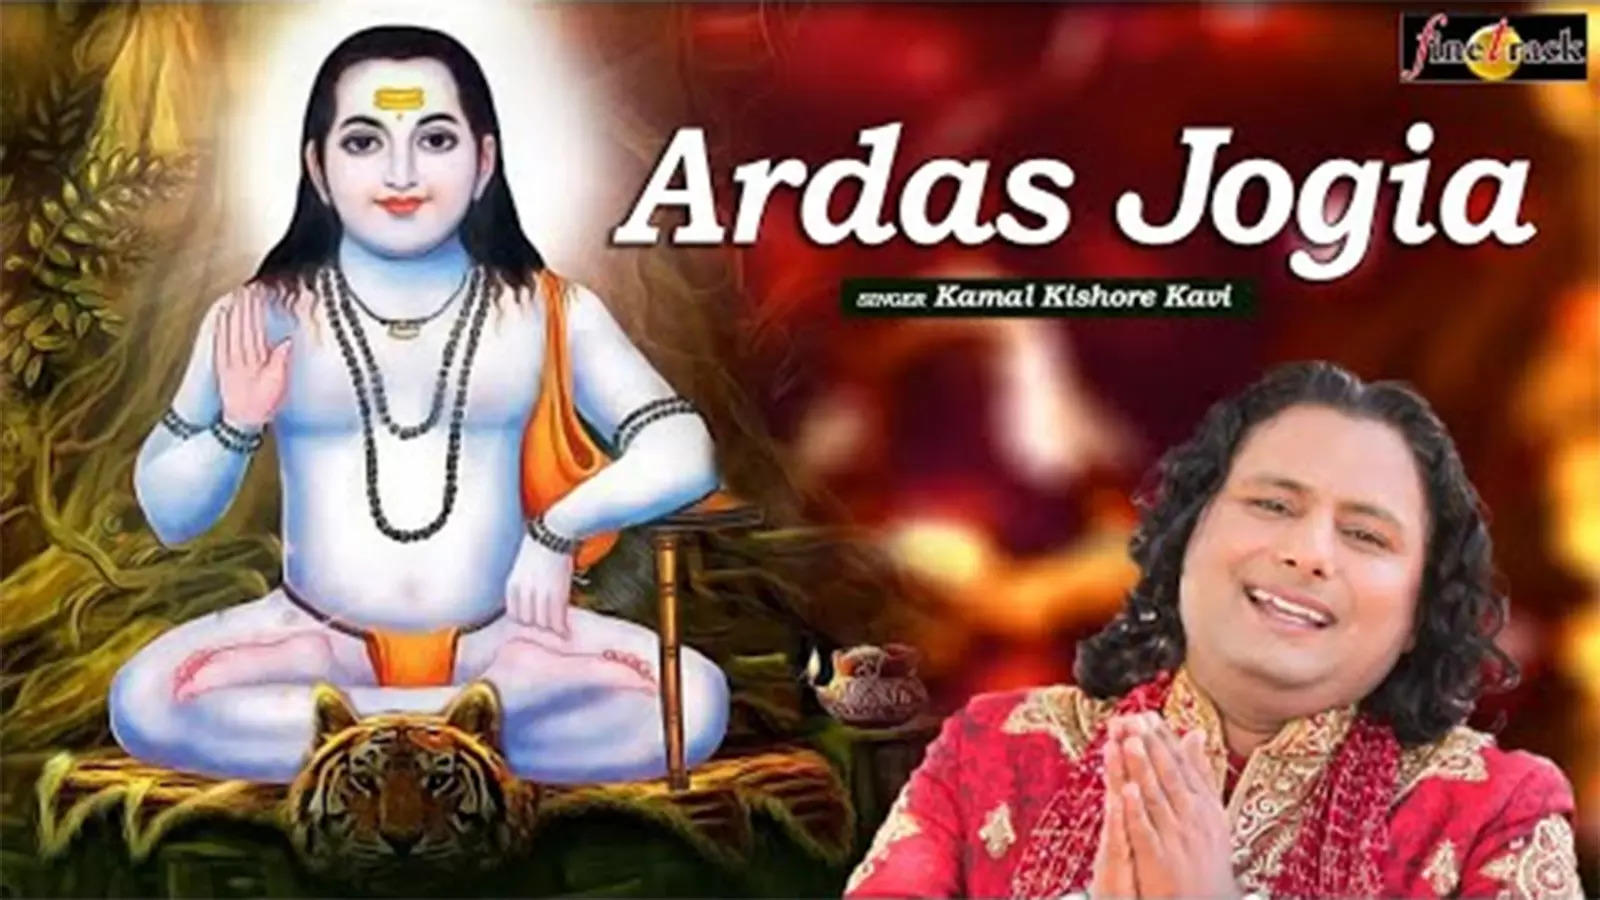 Check Out Latest Punjabi Devotional Song 'Ardas Jogia' Sung By Kamal  Kishore Kavi | Lifestyle - Times of India Videos